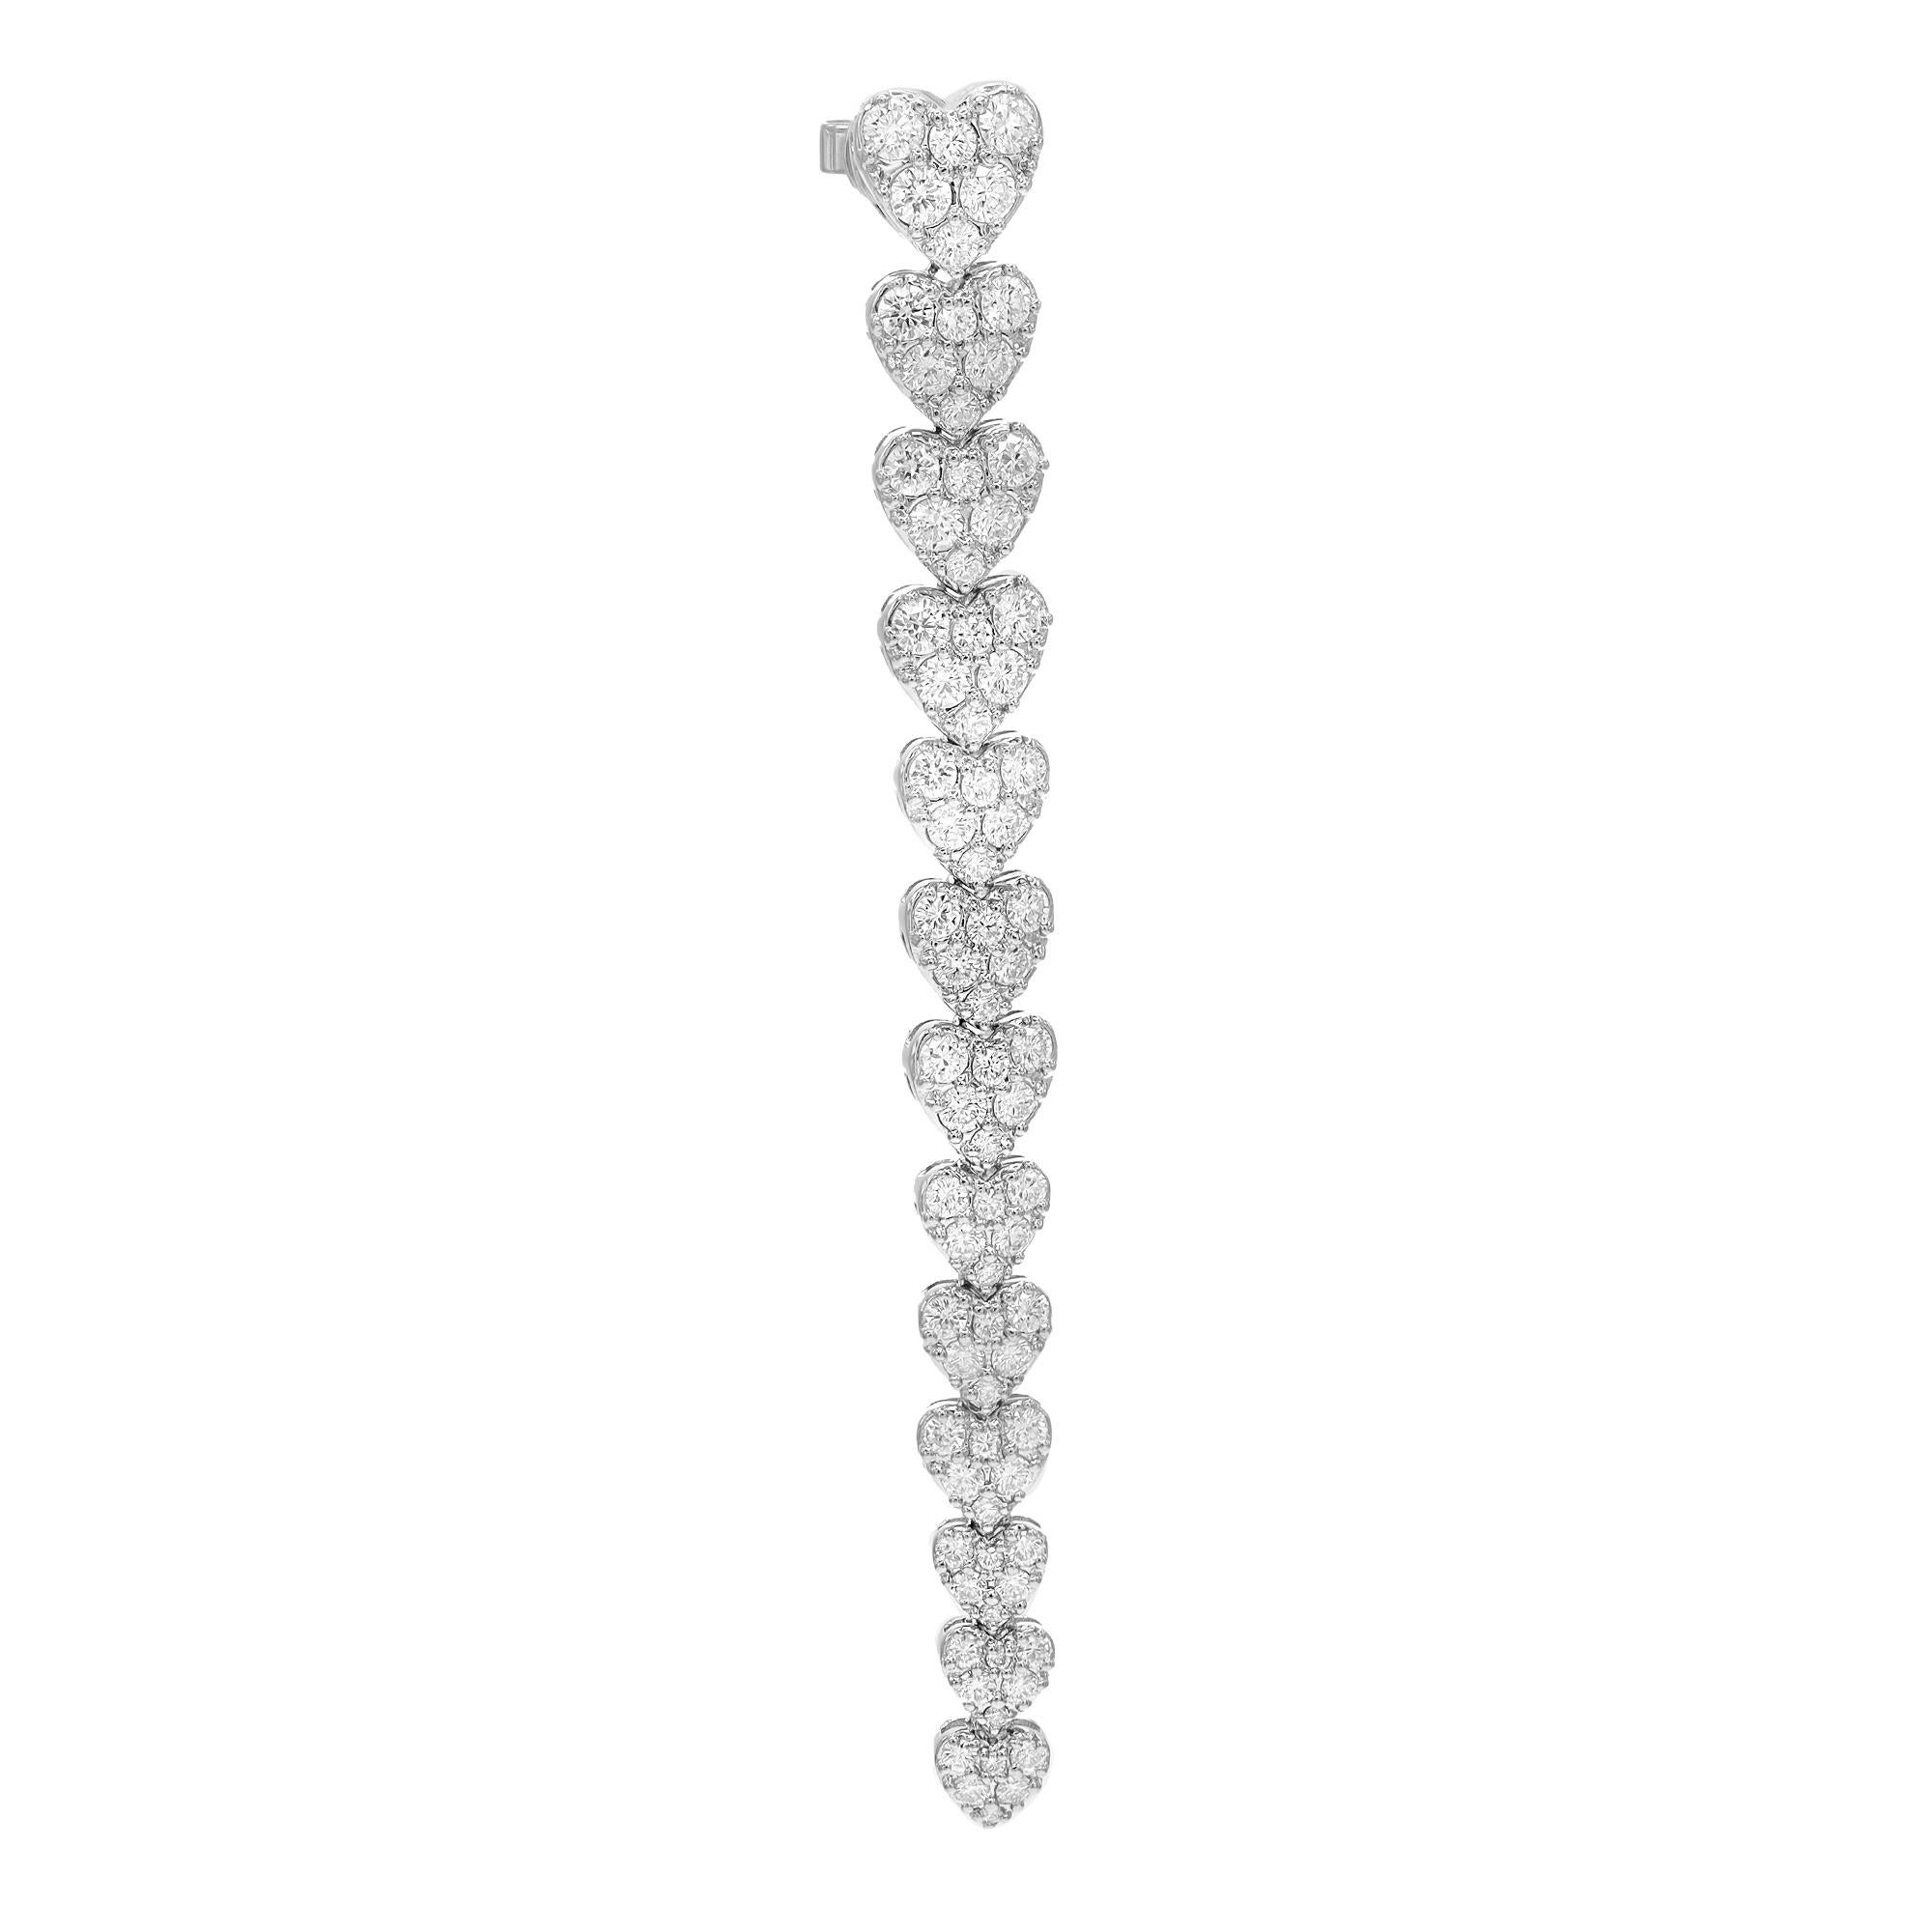 Showcasing these eye catchy multiple hearts long drop earrings, crafted in 18k white gold. These earrings feature 13 love hearts in graduation linked together to make a long drop earring. Encrusted with pave set round brilliant cut sparkling